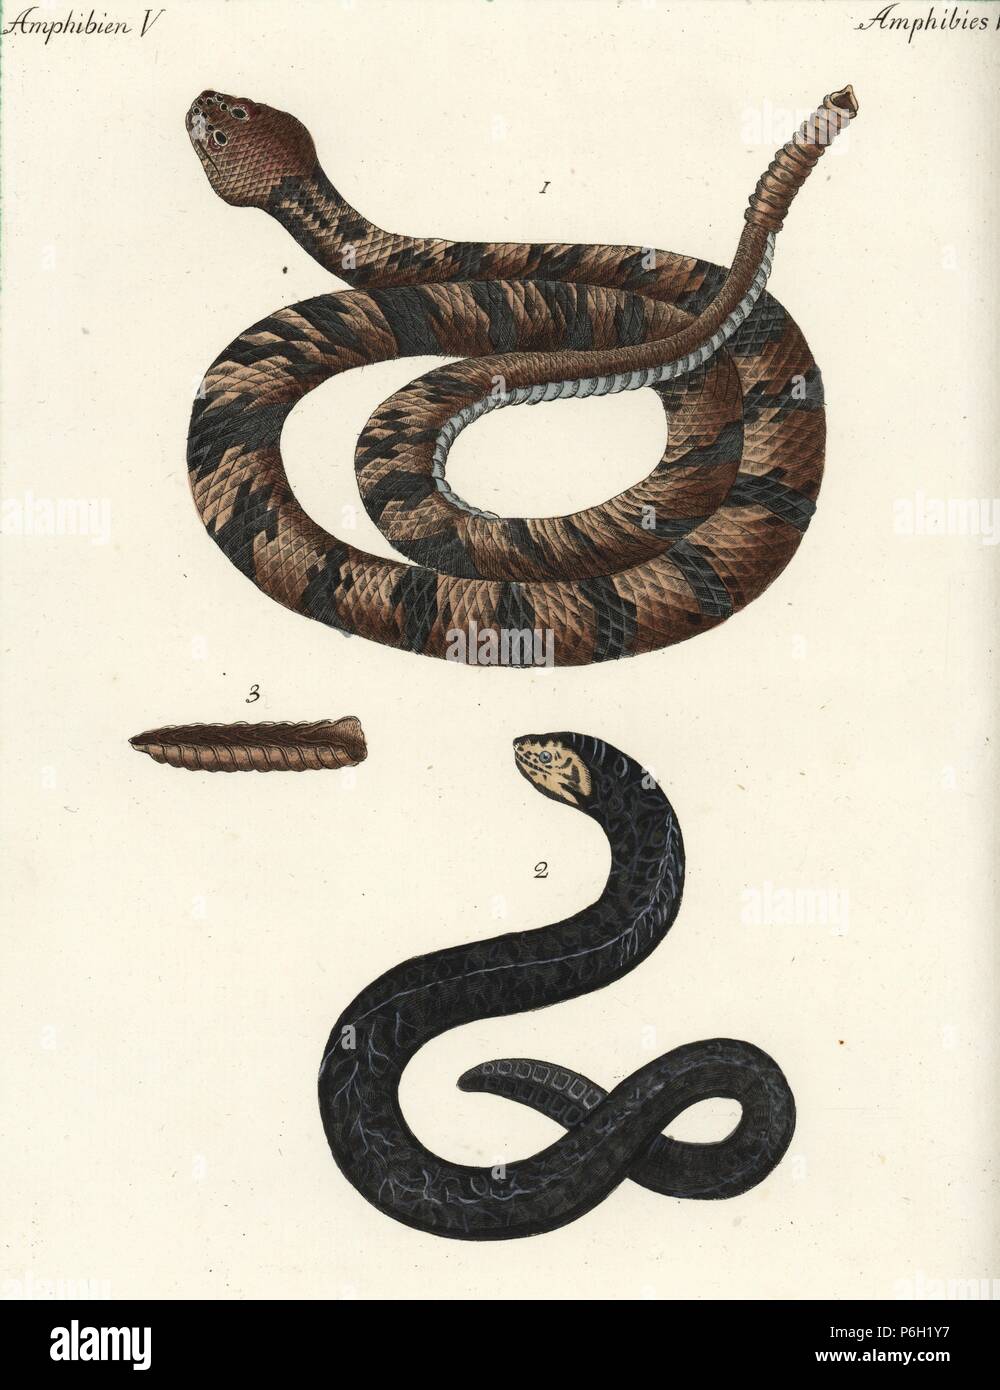 Timber rattlesnake, Crotalus horridus 1, tail rattle 3, and water snake, Muraena pinnis adiposis. Handcoloured copperplate engraving from Friedrich Johann Bertuch's Bilderbuch fur Kinder (Picture Book for Children), Weimar, 1792. Stock Photo